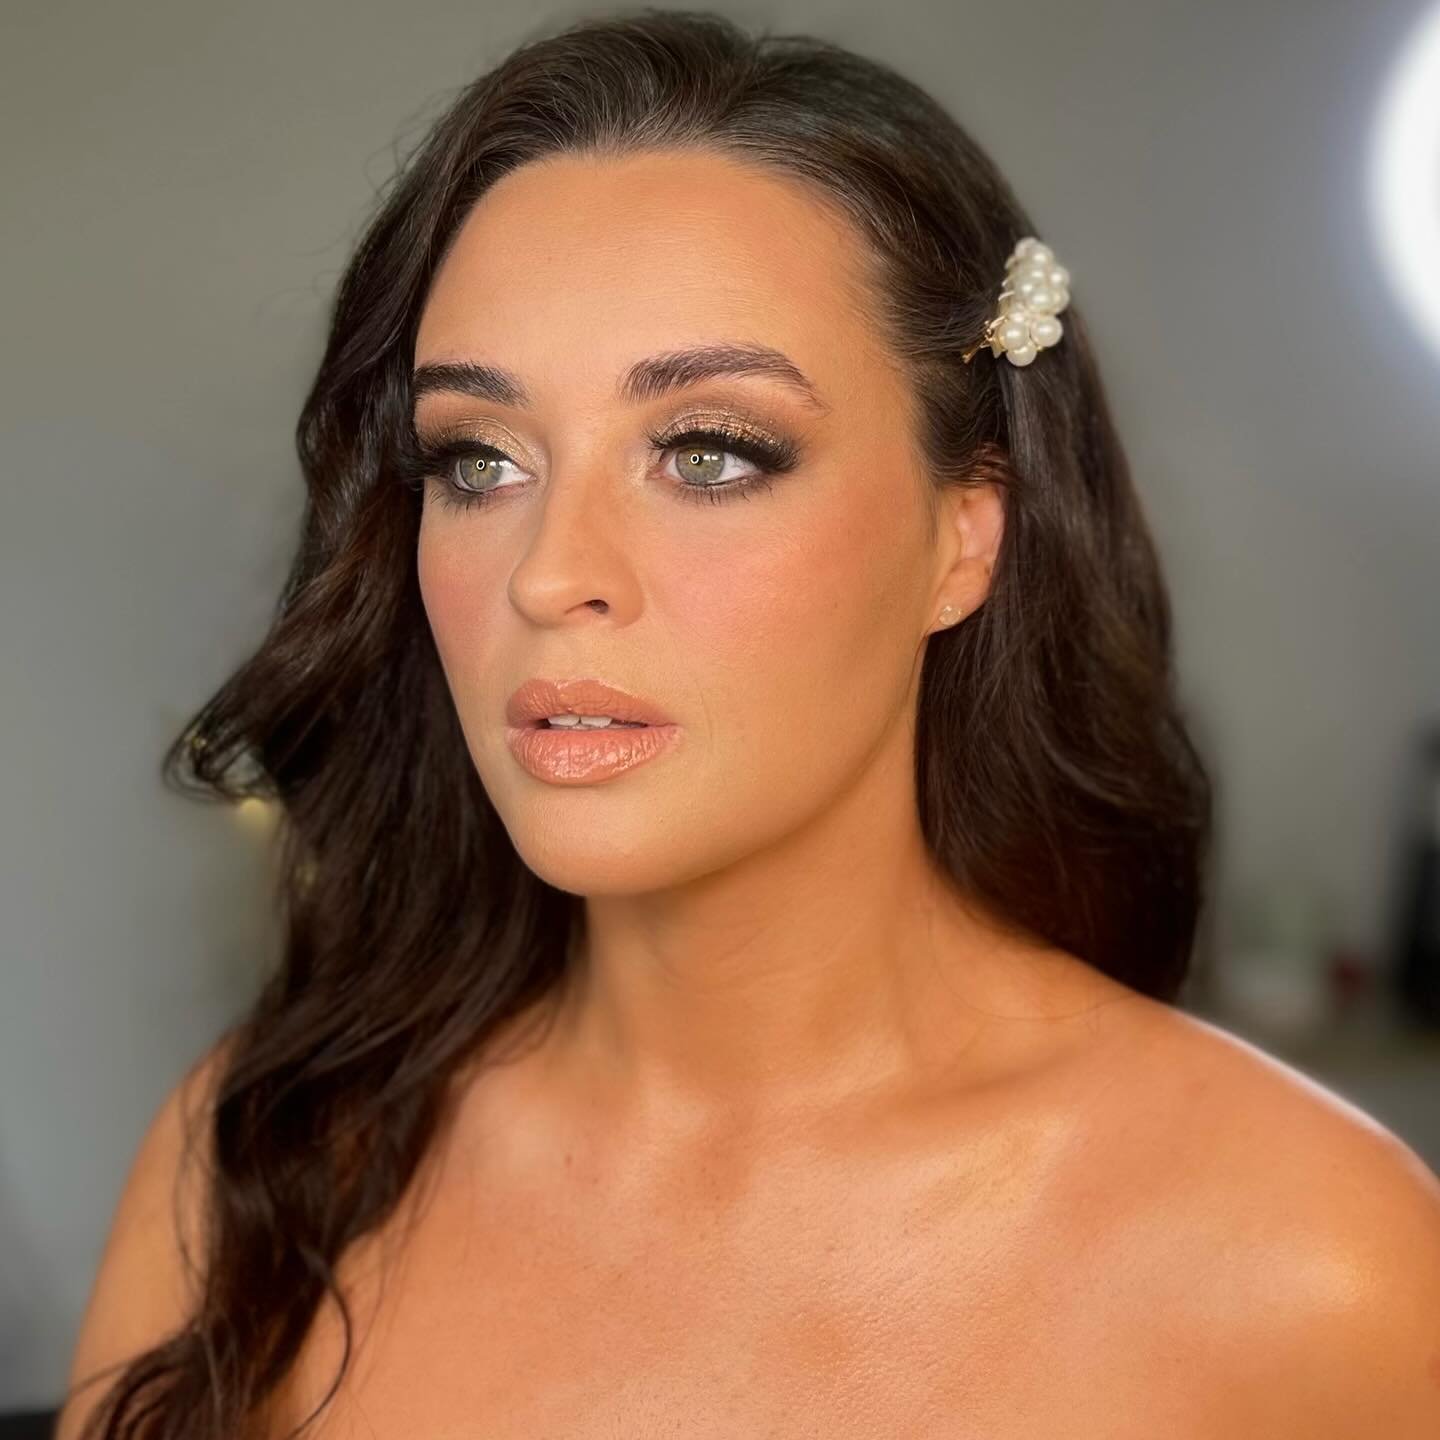 Are you a Matte or Glitter Girl? ✨
Swipe to see this eyeshadow of Dreams ~ I was totally shocked at how pigmented it was! I mean wow 🤩 
.
.
.
.
Beautiful Model @ninadalziel 
.
#bridalmua #eyeshadow #matteorglitter #glittereyeshadow #norfolkmakeupart